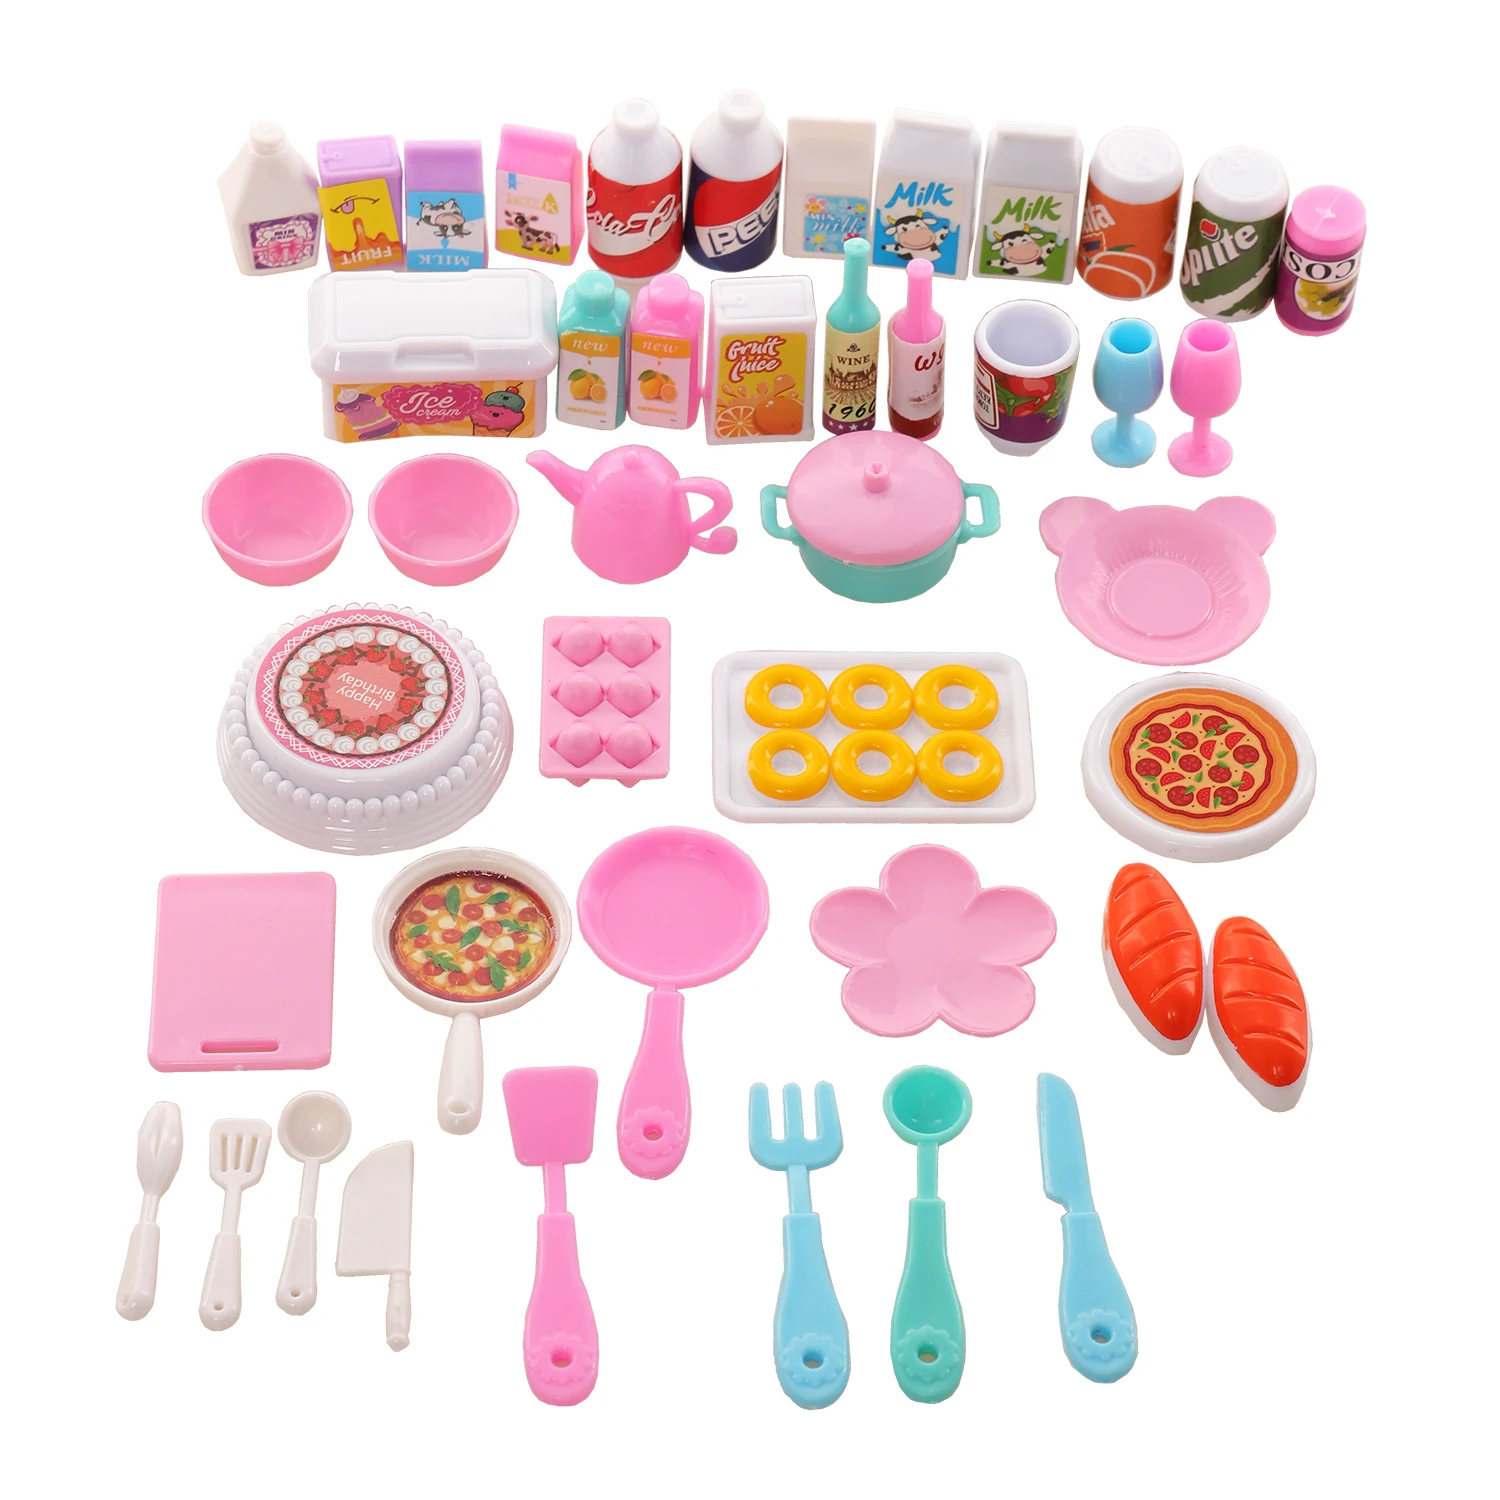 Dollhouse Mini Kitchen Food for Barbie 43 Pcs Dinner Set Fork Knif Plate Pizza Soup Tableware Cute Kids Toys Doll Accessories high end shell sashimi plate ice plate dry ice creative food tableware salmon sashimi special plate plate